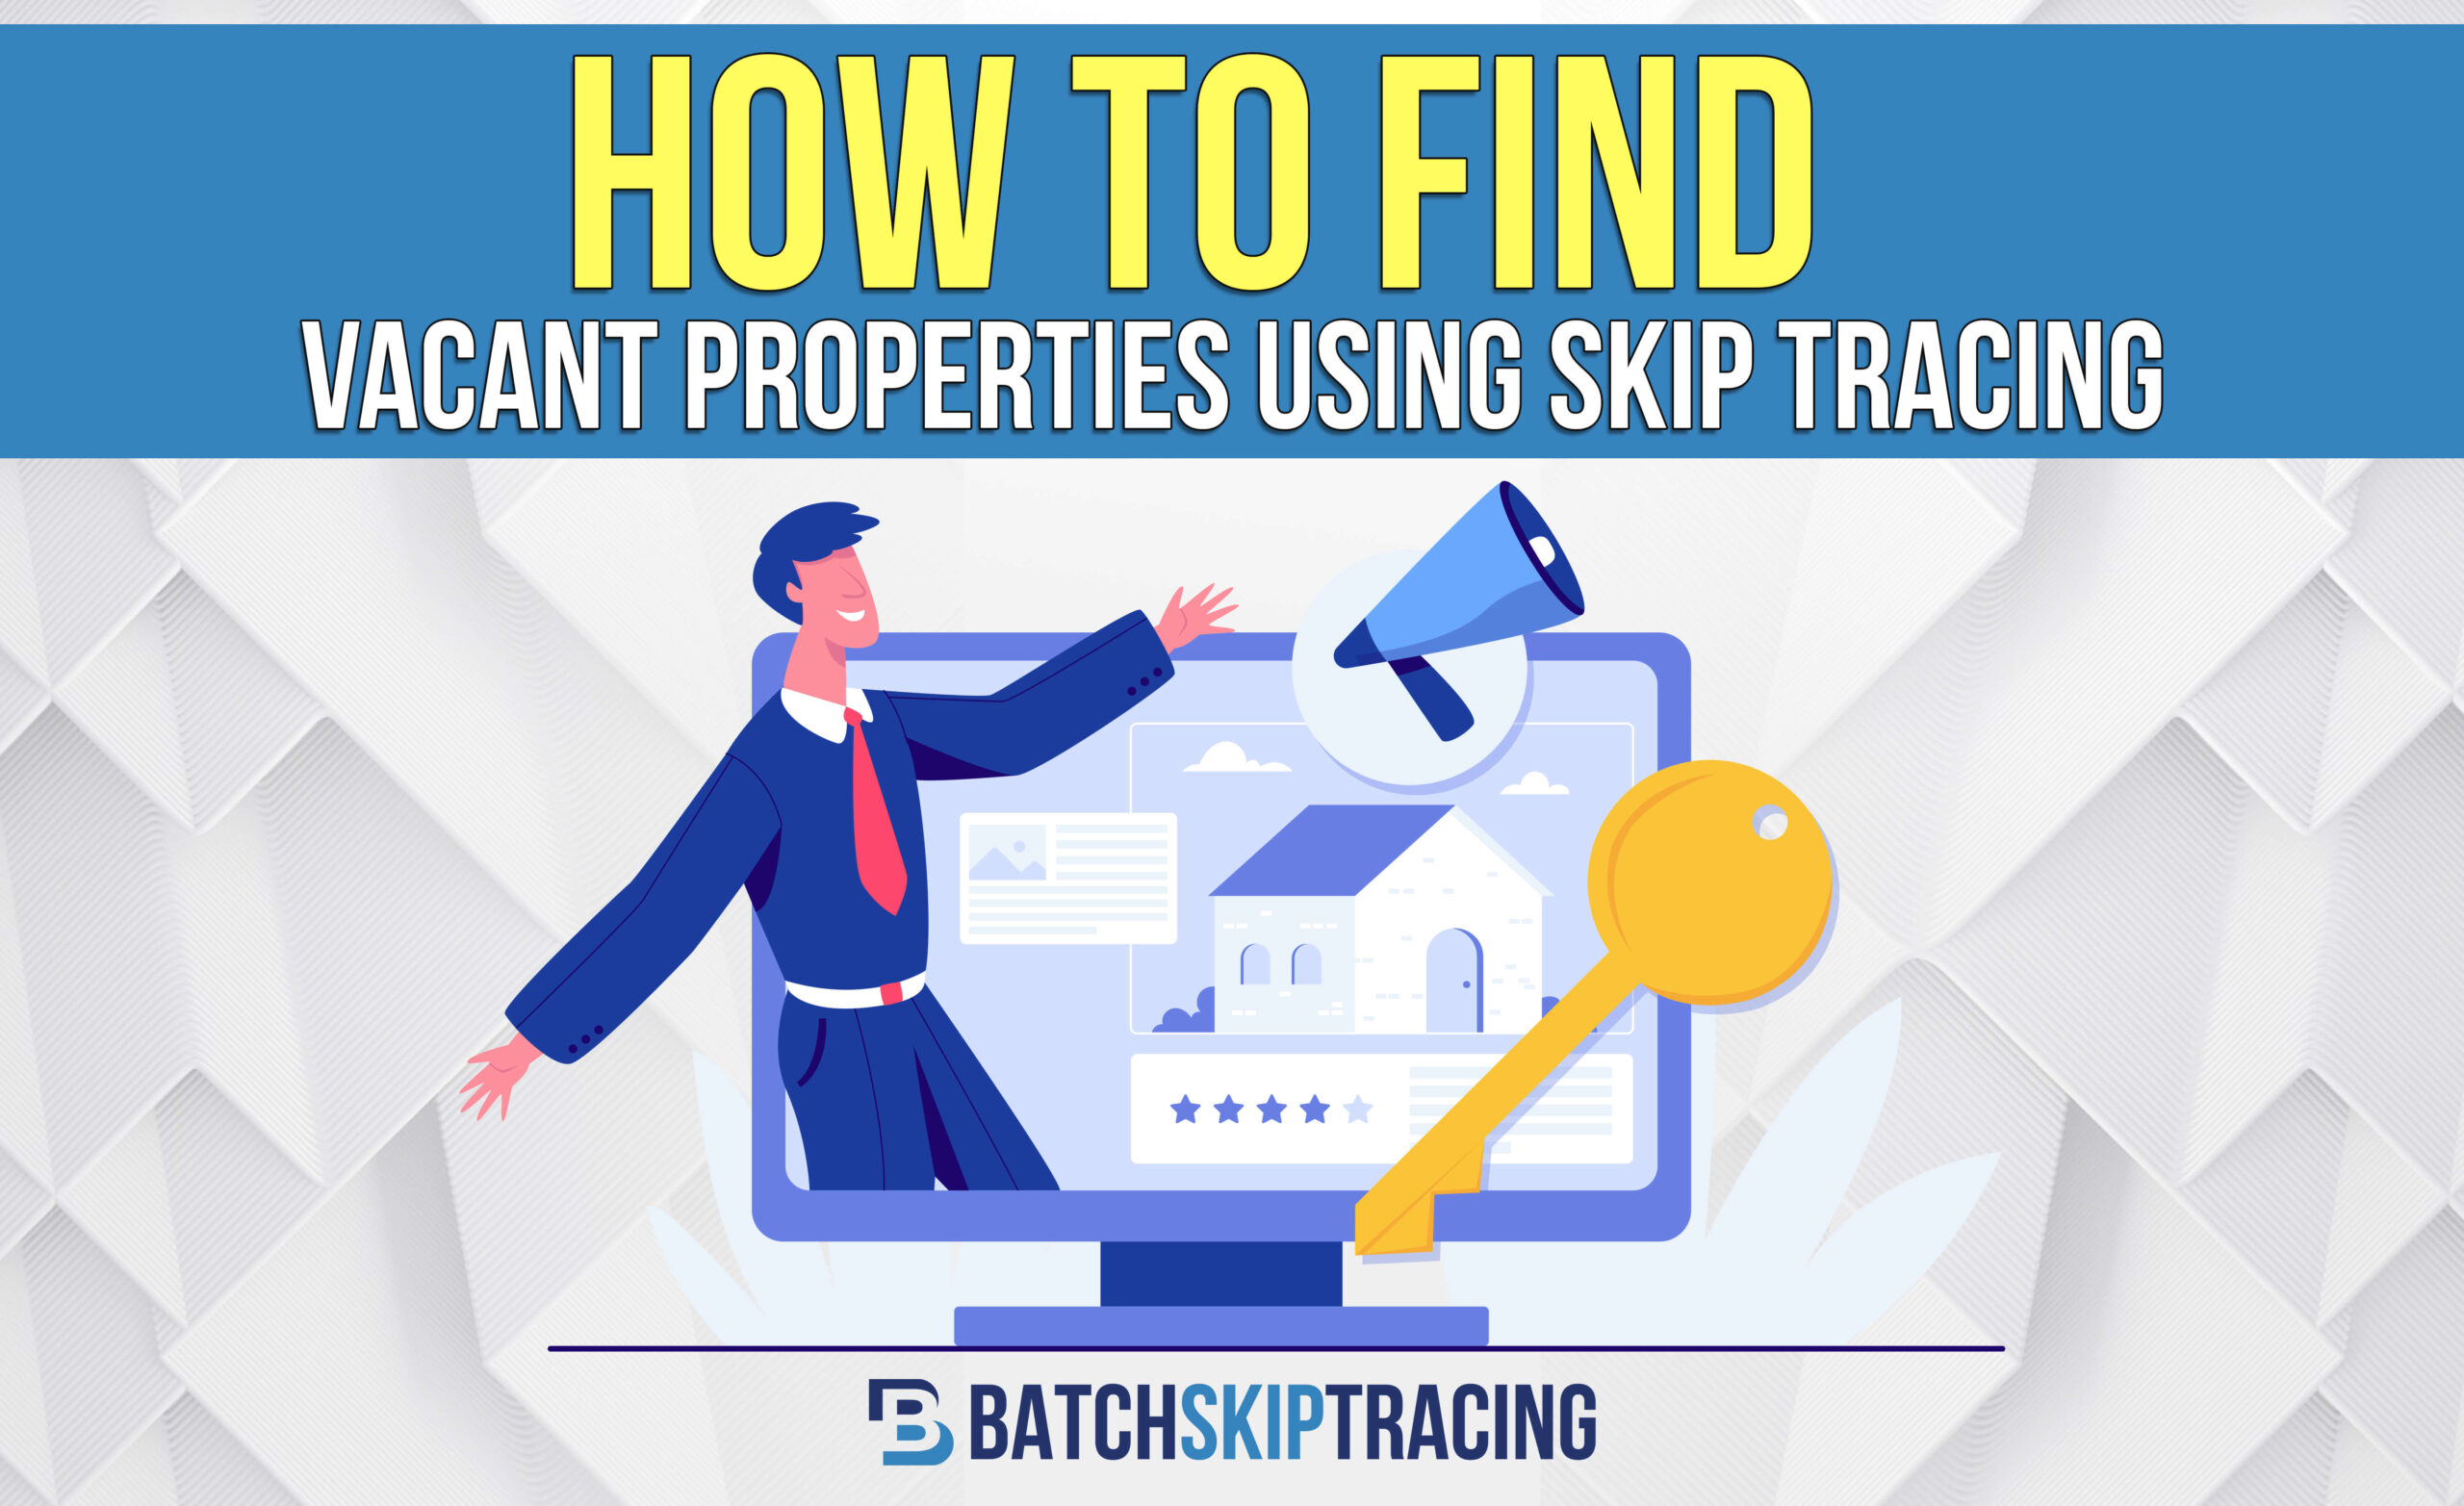 How to Find Vacant Properties Using Skip Tracing